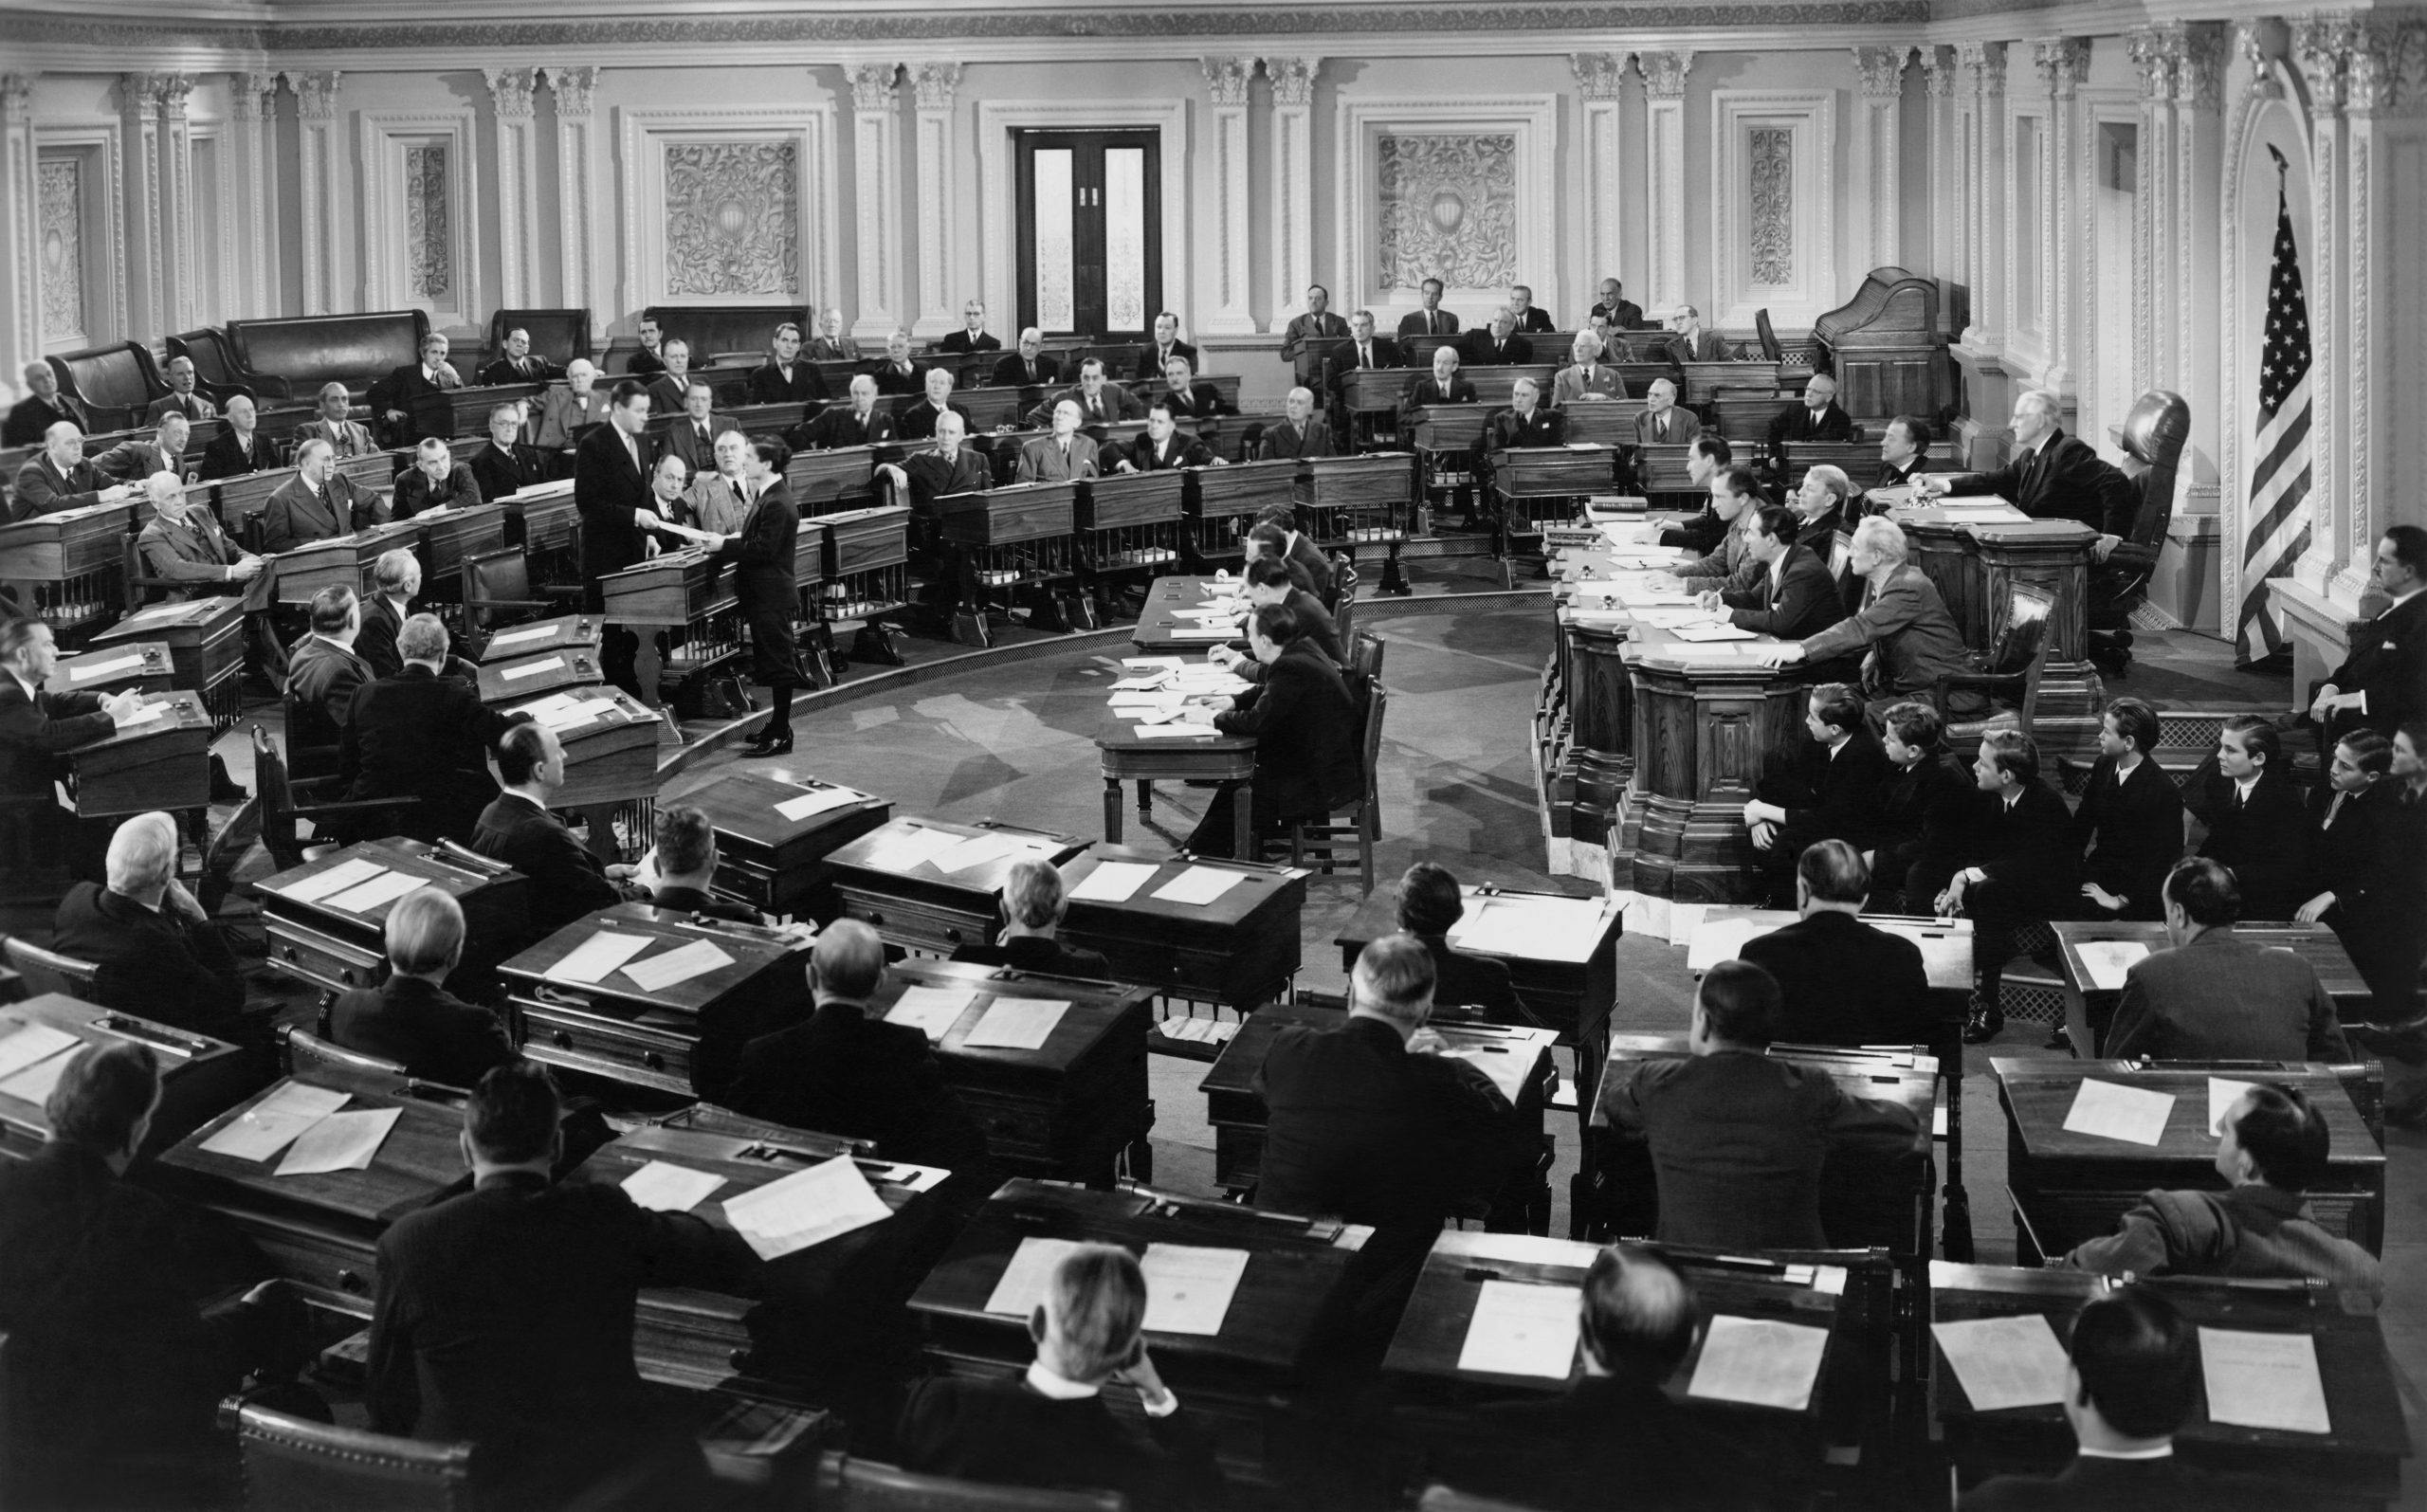 Legislators convene in a large, ornate chamber, engaged in discussions and deliberations. Wooden desks scattered with papers fill the room, and the American flag stands in the background.